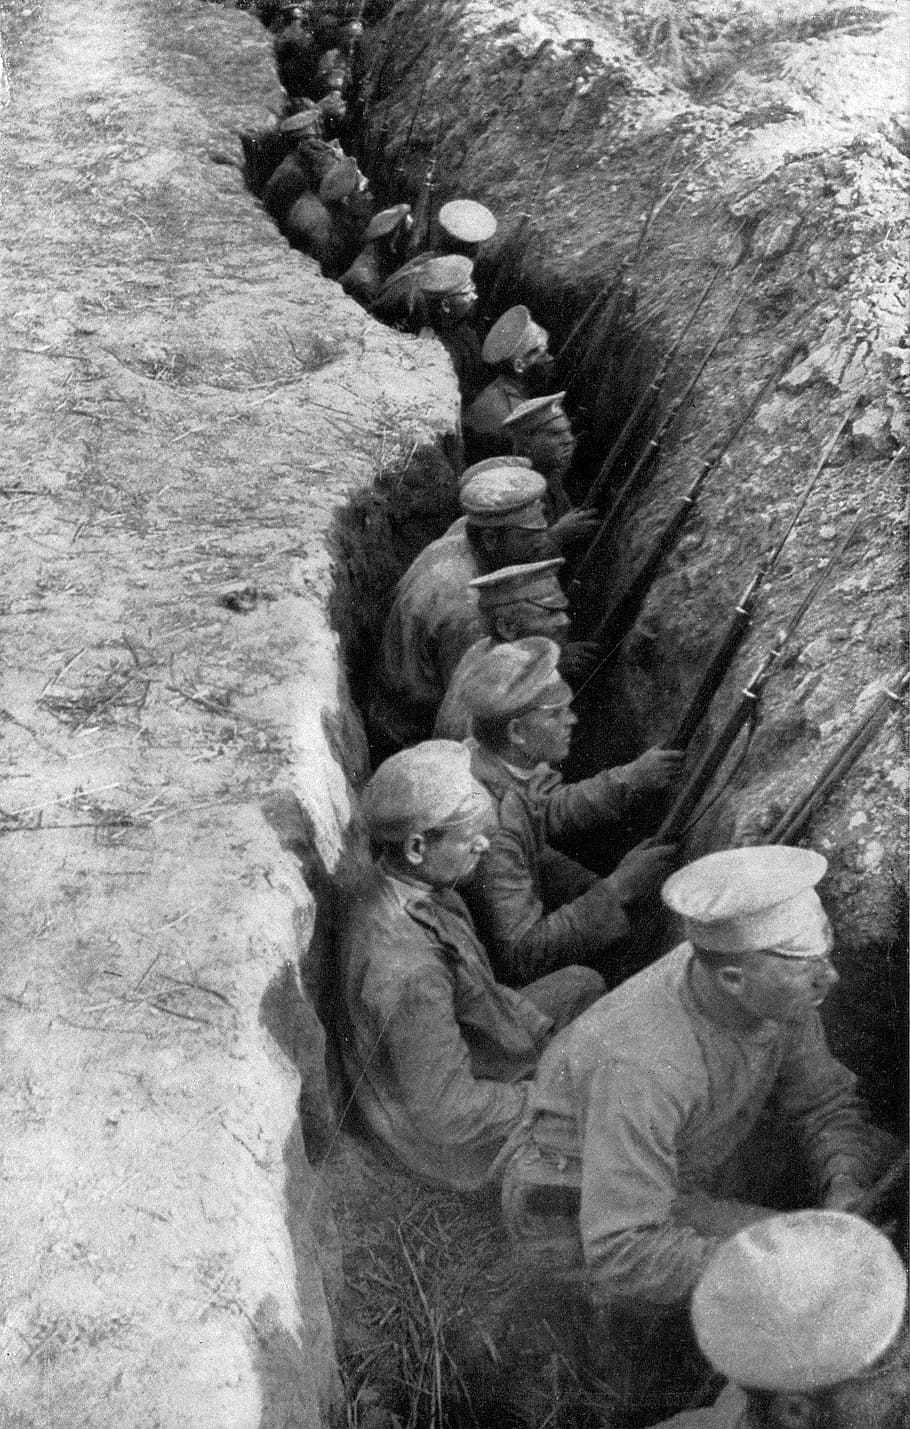 russia troops, awaiting, german attack, Russia, Troops, Trench, German, Attack, World War I, army